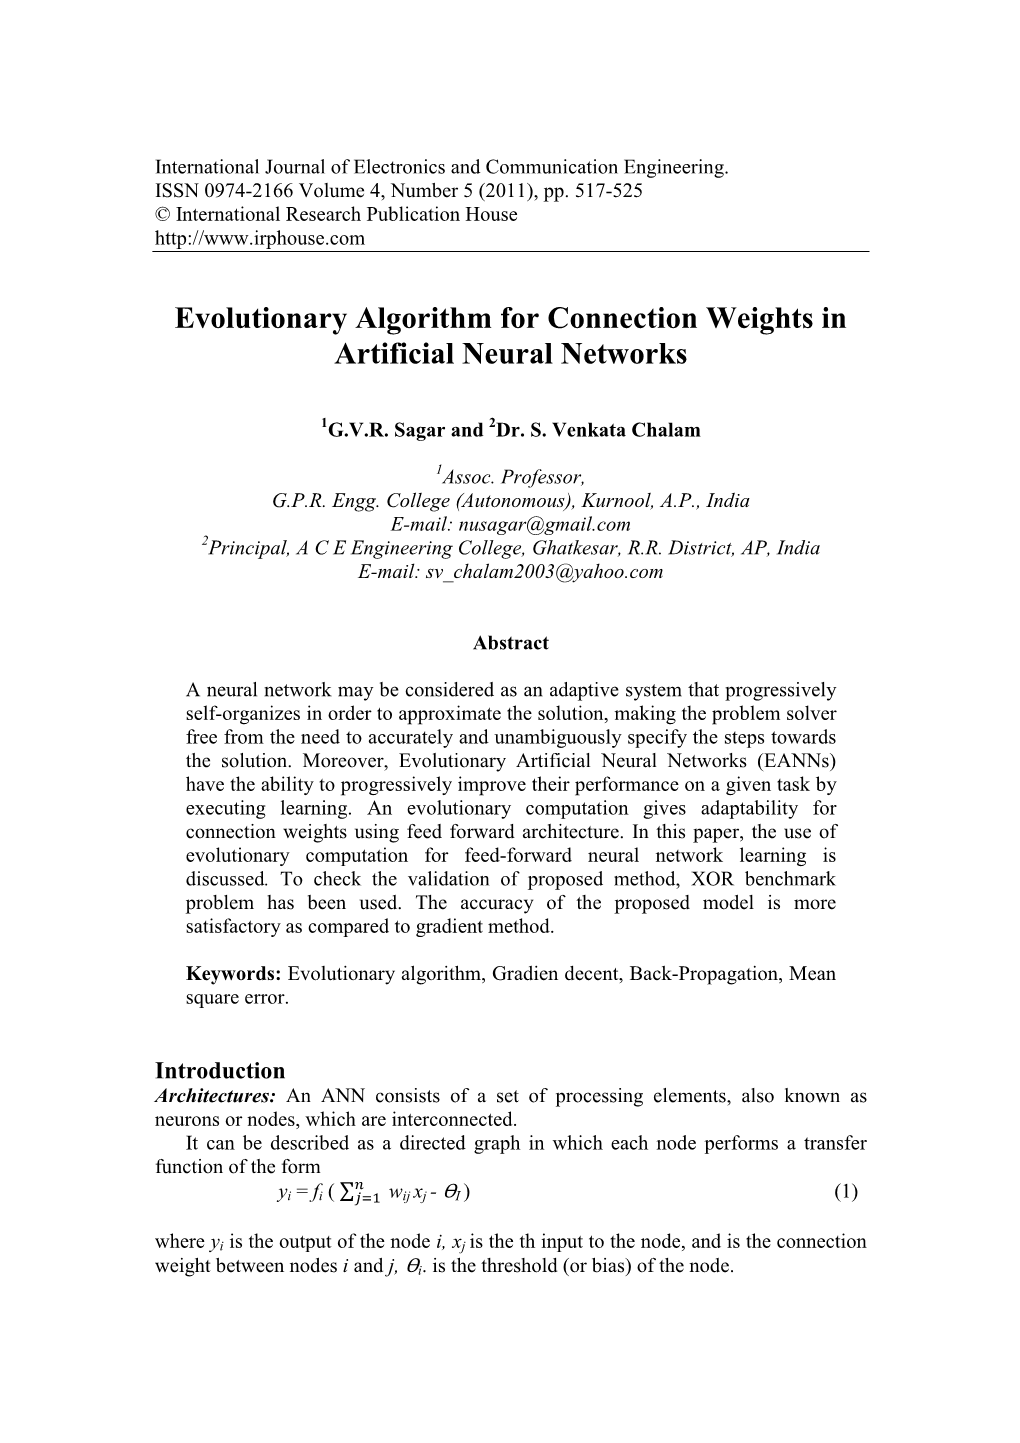 Evolutionary Algorithm for Connection Weights in Artificial Neural Networks